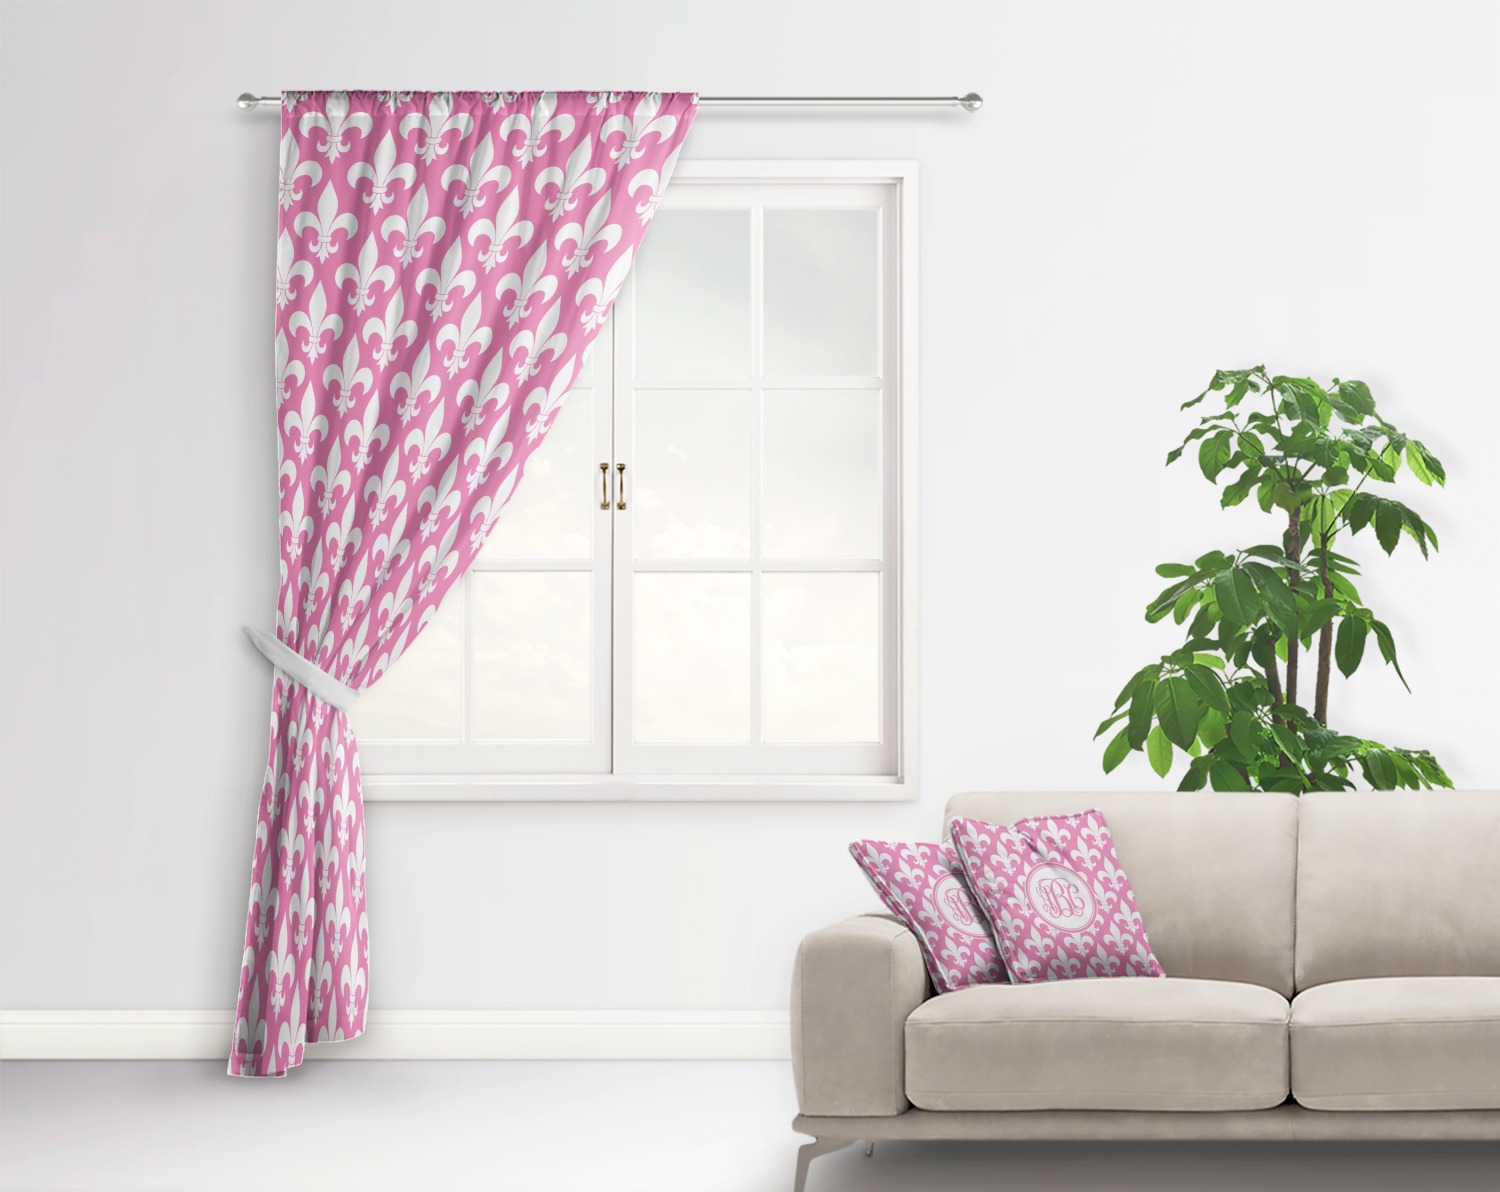 Fleur De Lis Curtain With Window And Rod In Room Matching Pillow 